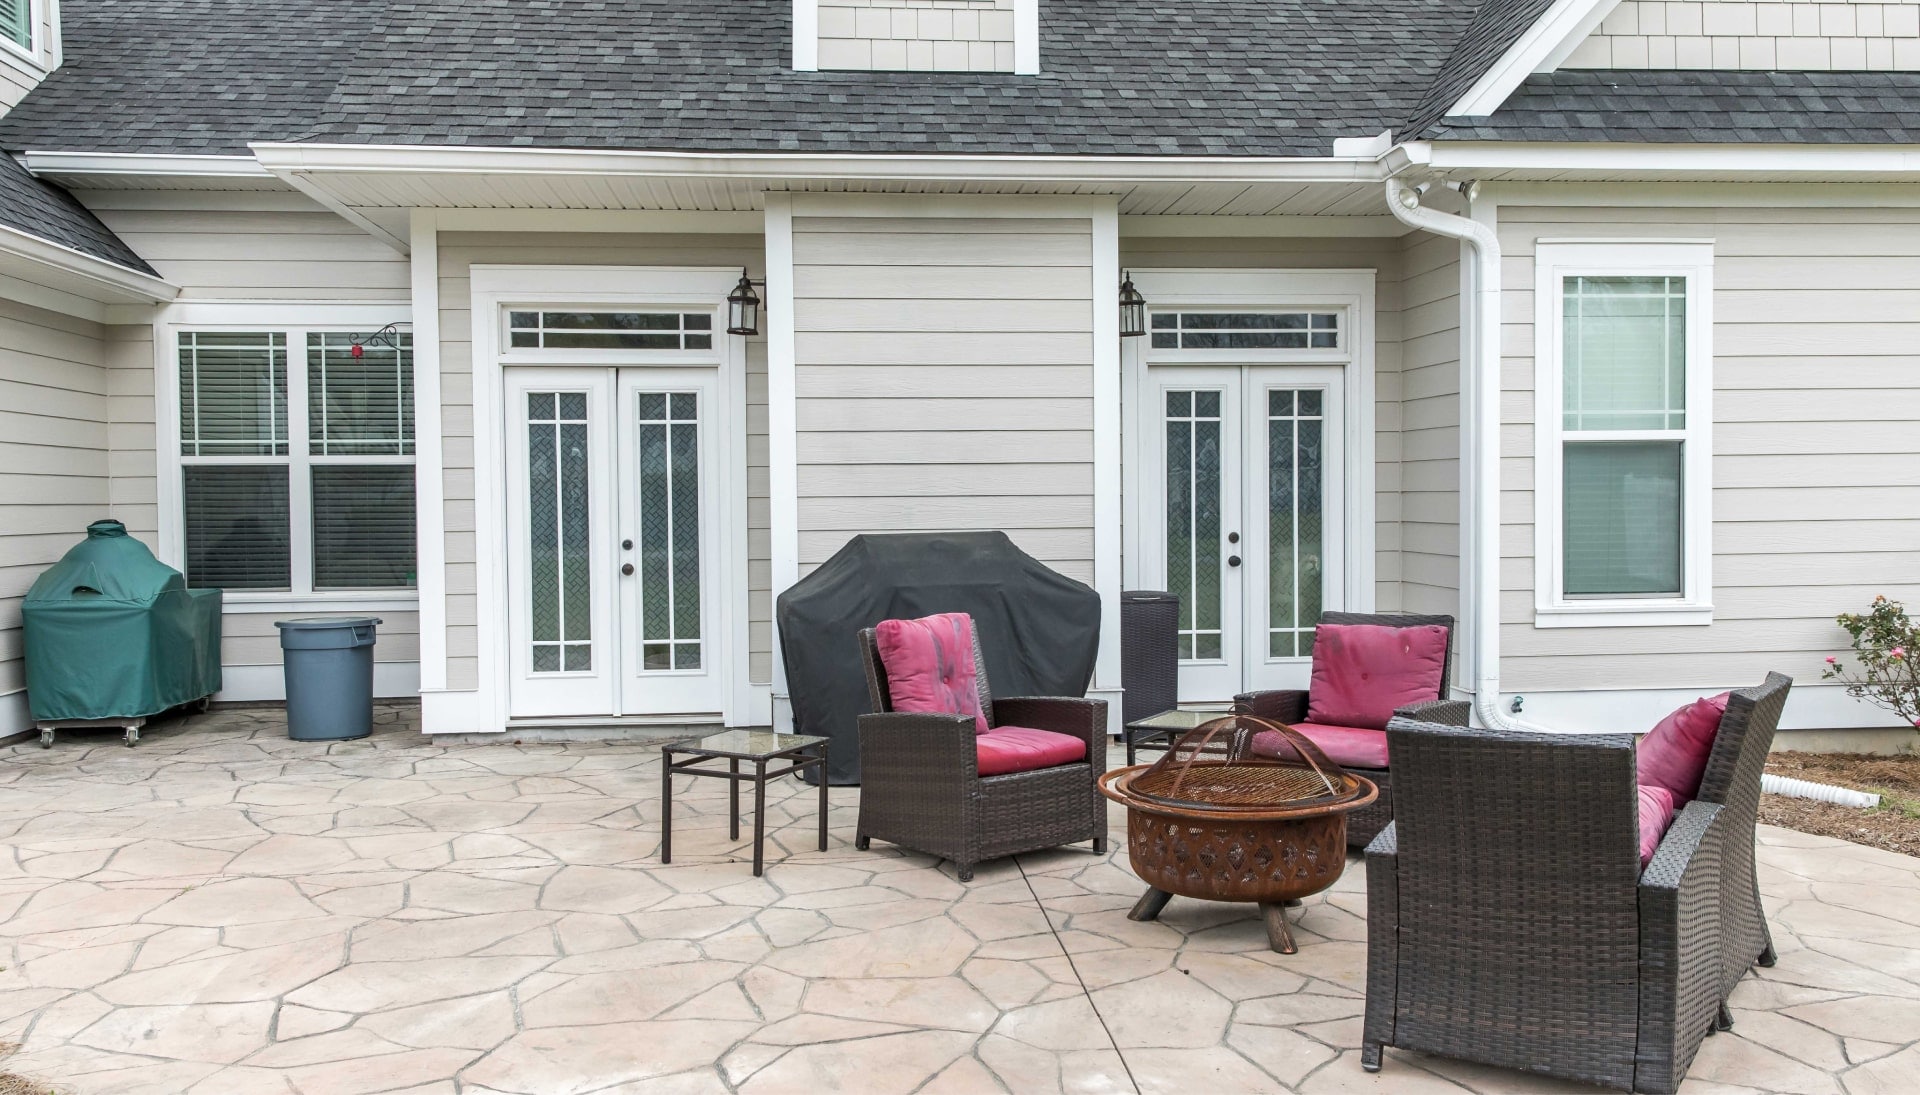 Elevate Your Outdoor Living Space with Stunning Stamped Concrete Patio in Orange County, CA - Choose from a Variety of Creative Patterns and Colors to Achieve a Unique and Eye-Catching Look for Your Patio with Long-Lasting Durability and Low-Maintenance.